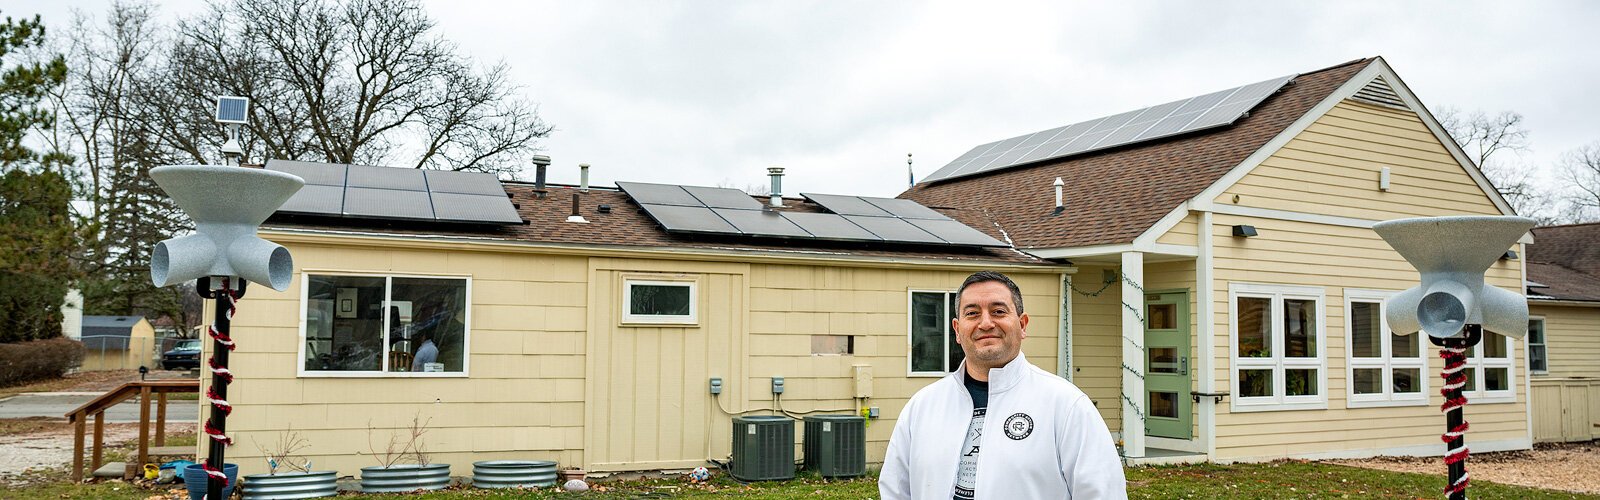 Community Action Network Executive Director Derrick Miller in front of the solar panels on the Bryant Community Center.